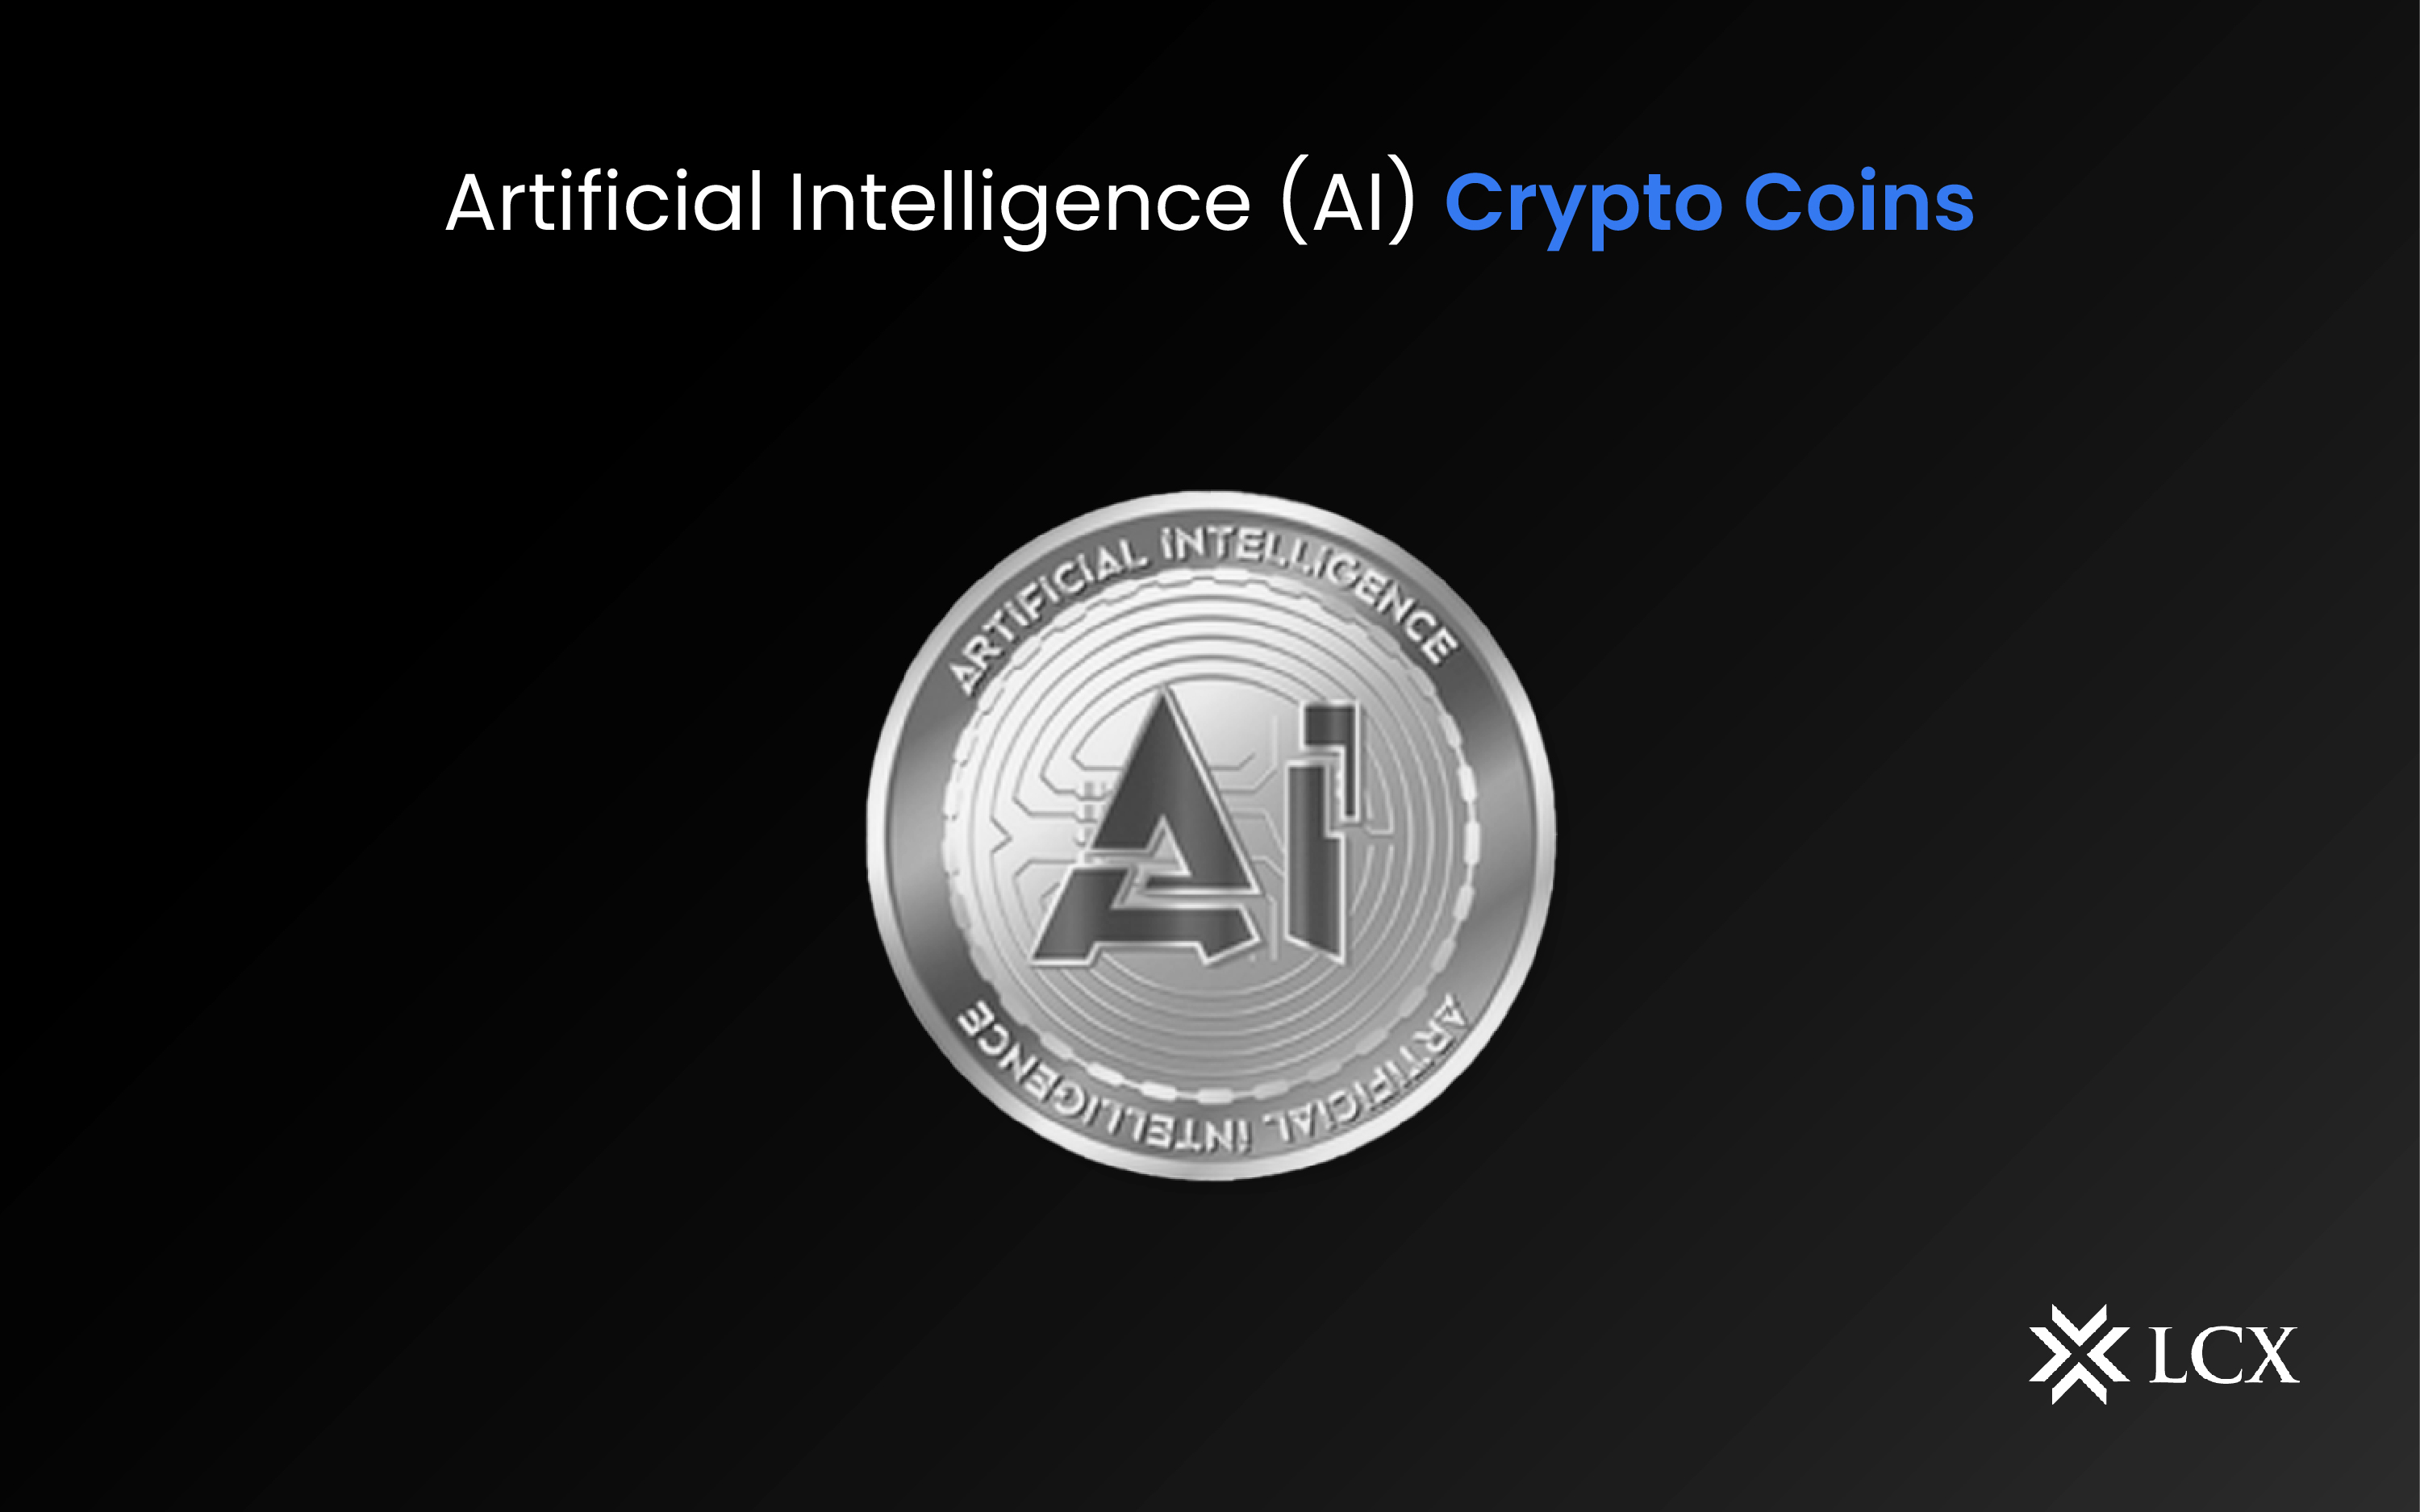 Artificial Intelligence (AI) Crypto Coins LCX